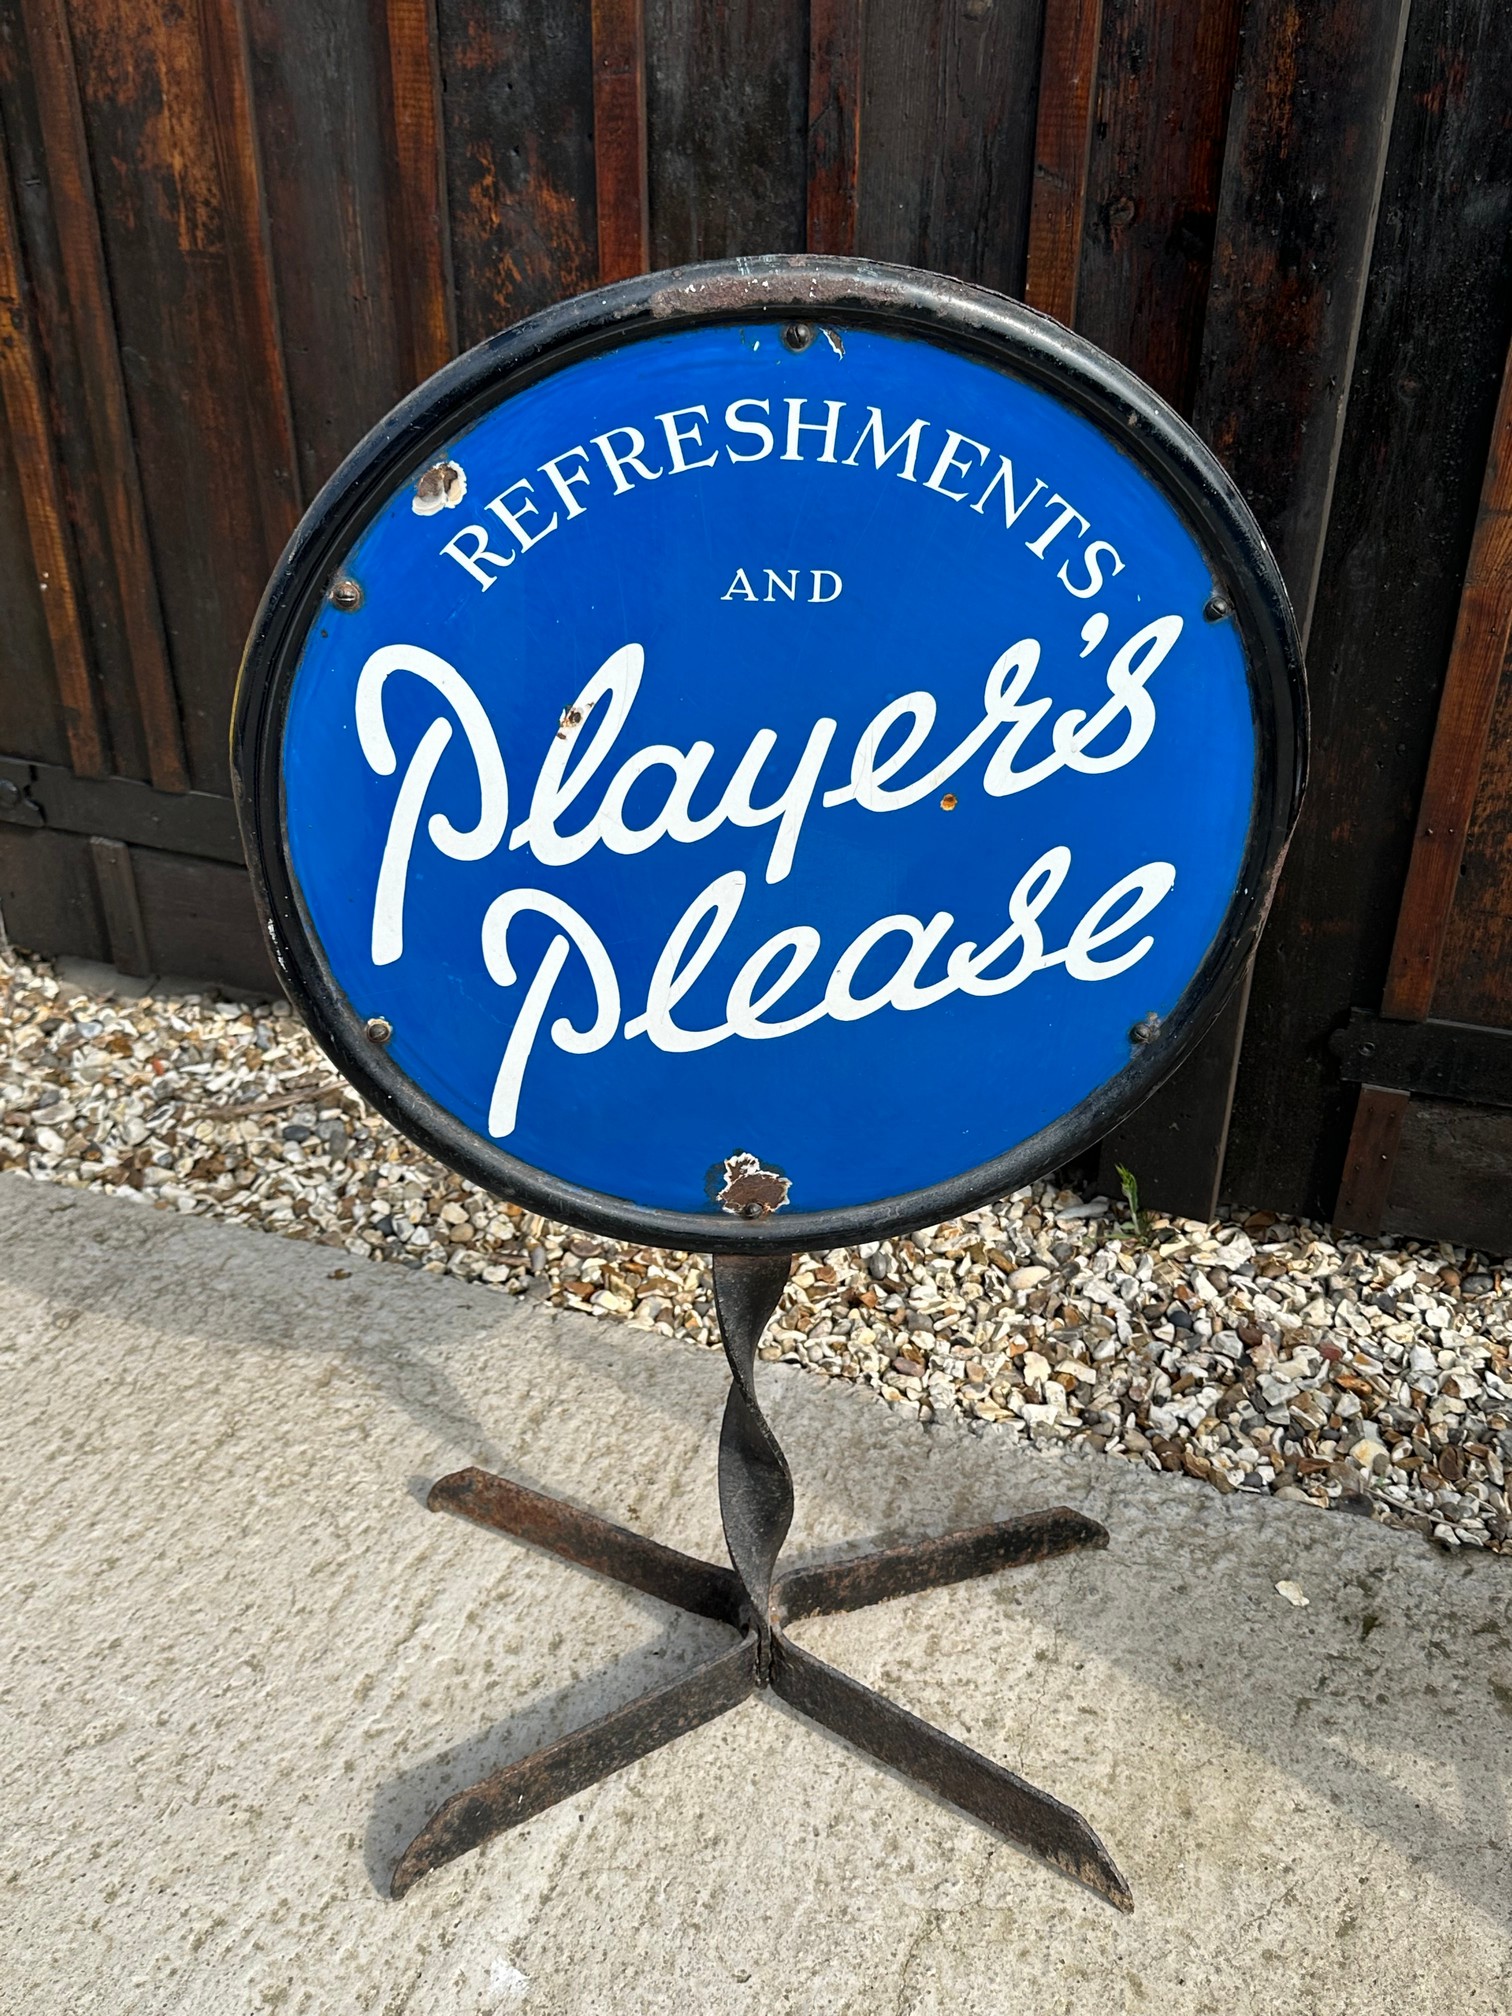 A double sided Player's Please (Cigarettes) Refreshments enamel advertising stand, 23 1/4 x 38". - Image 2 of 2